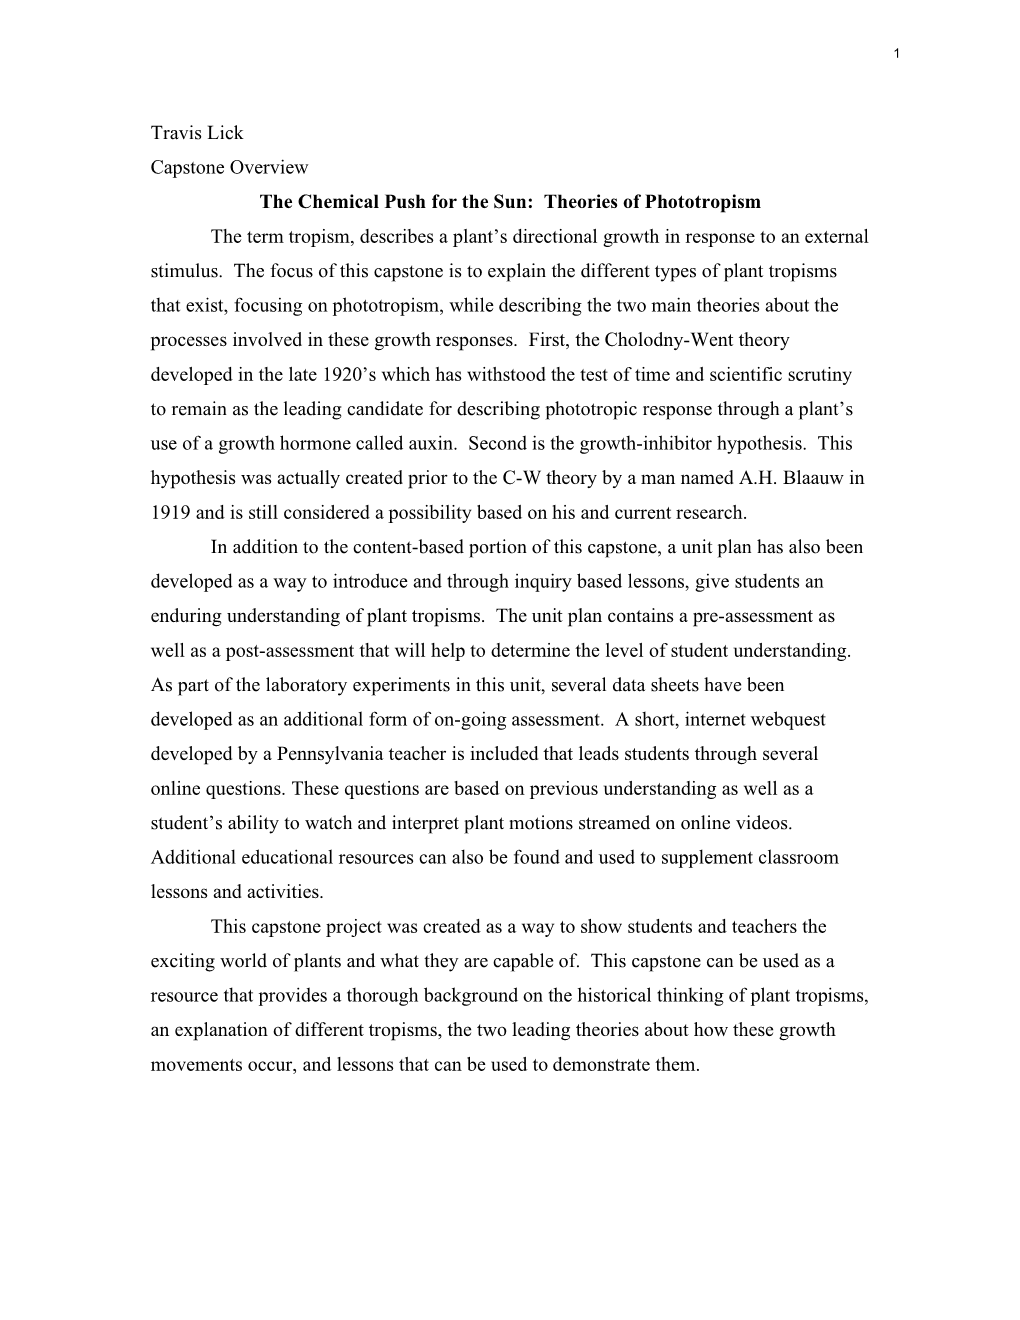 Travis Lick Capstone Overview the Chemical Push for the Sun: Theories of Phototropism the Term Tropism, Describes a Plant's D